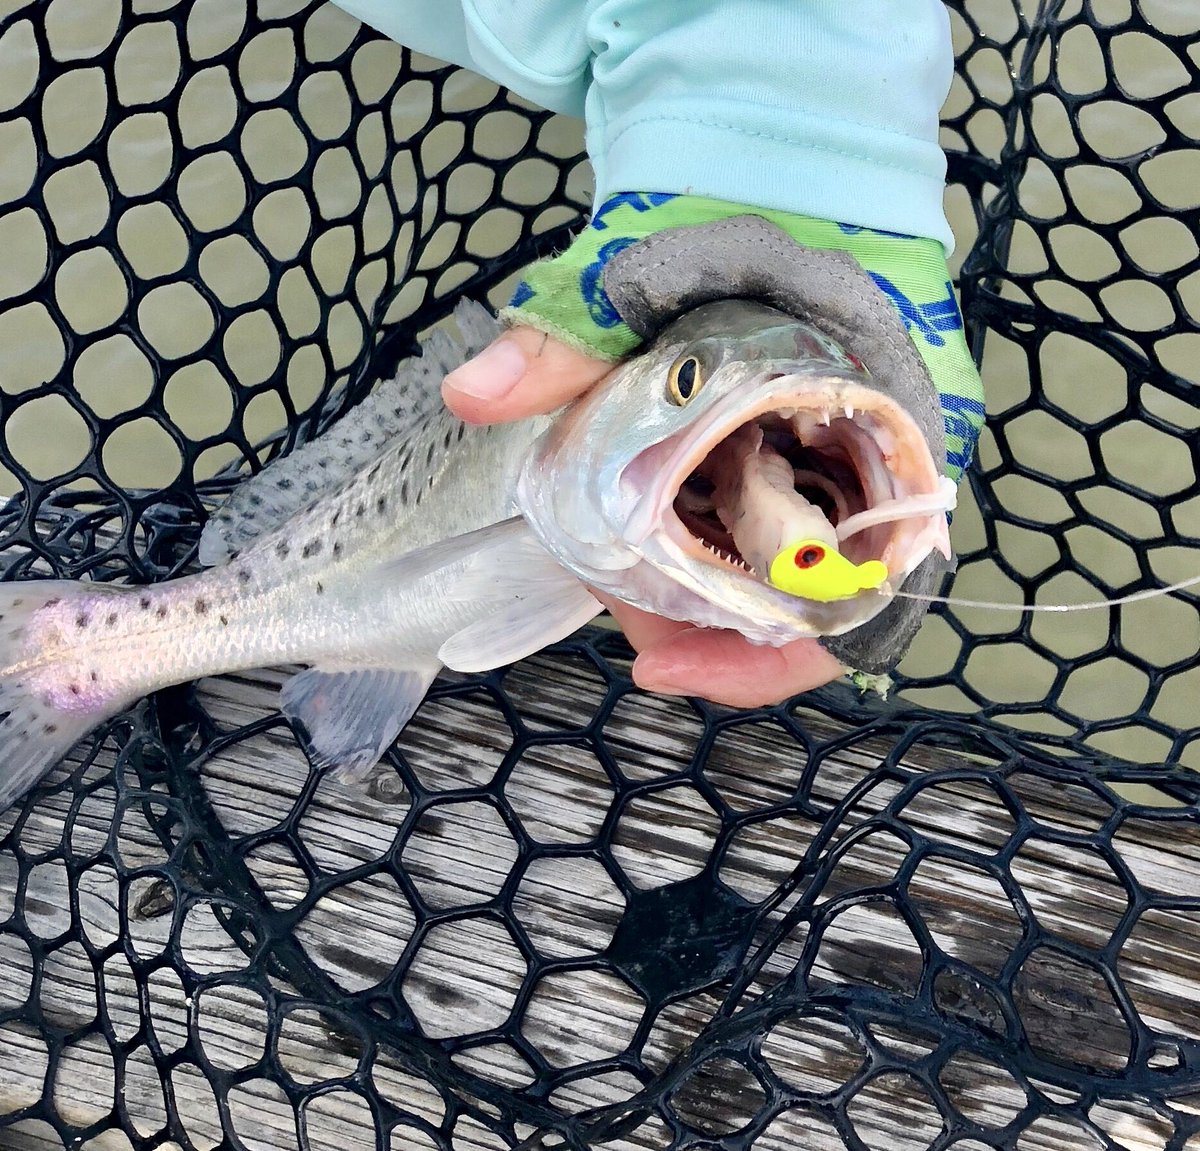 Trout just don’t want to let go of the @csbFishbites Dirty Boxer Curly Tail!! Really liking the Fishbites Fight Club line-up! #fishbites #fishbitesfightclub #jigheads #seattout #saltwaterfishing #fishbitesjigheads #whatthefin #fishmonkeygloves #livelifewithnolimits 🎣🦿